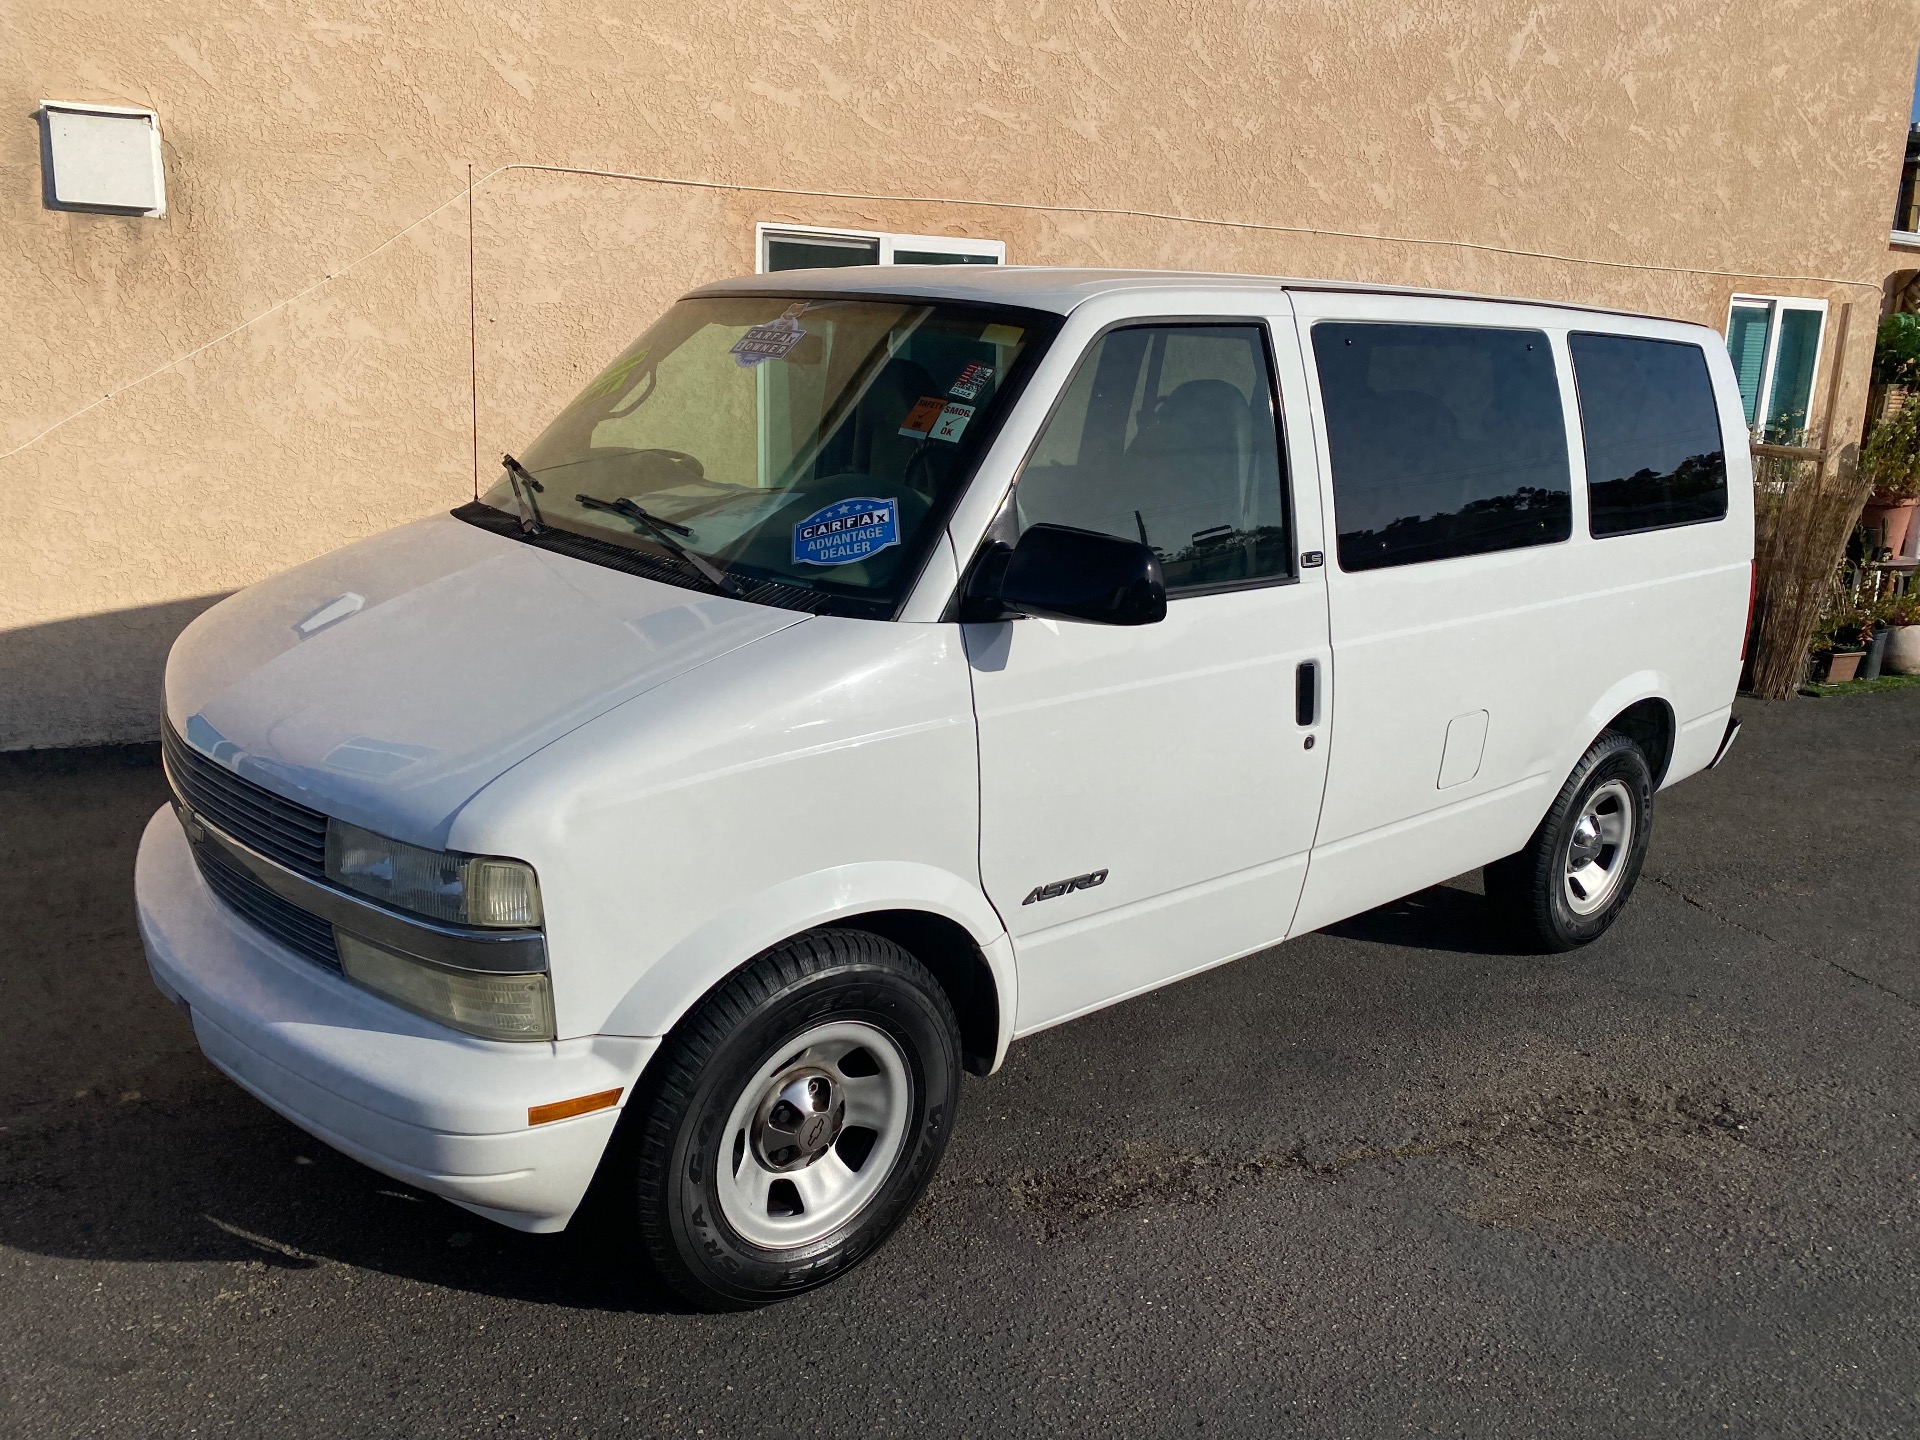 Used 2002 Chevrolet Astro's nationwide for sale - MotorCloud